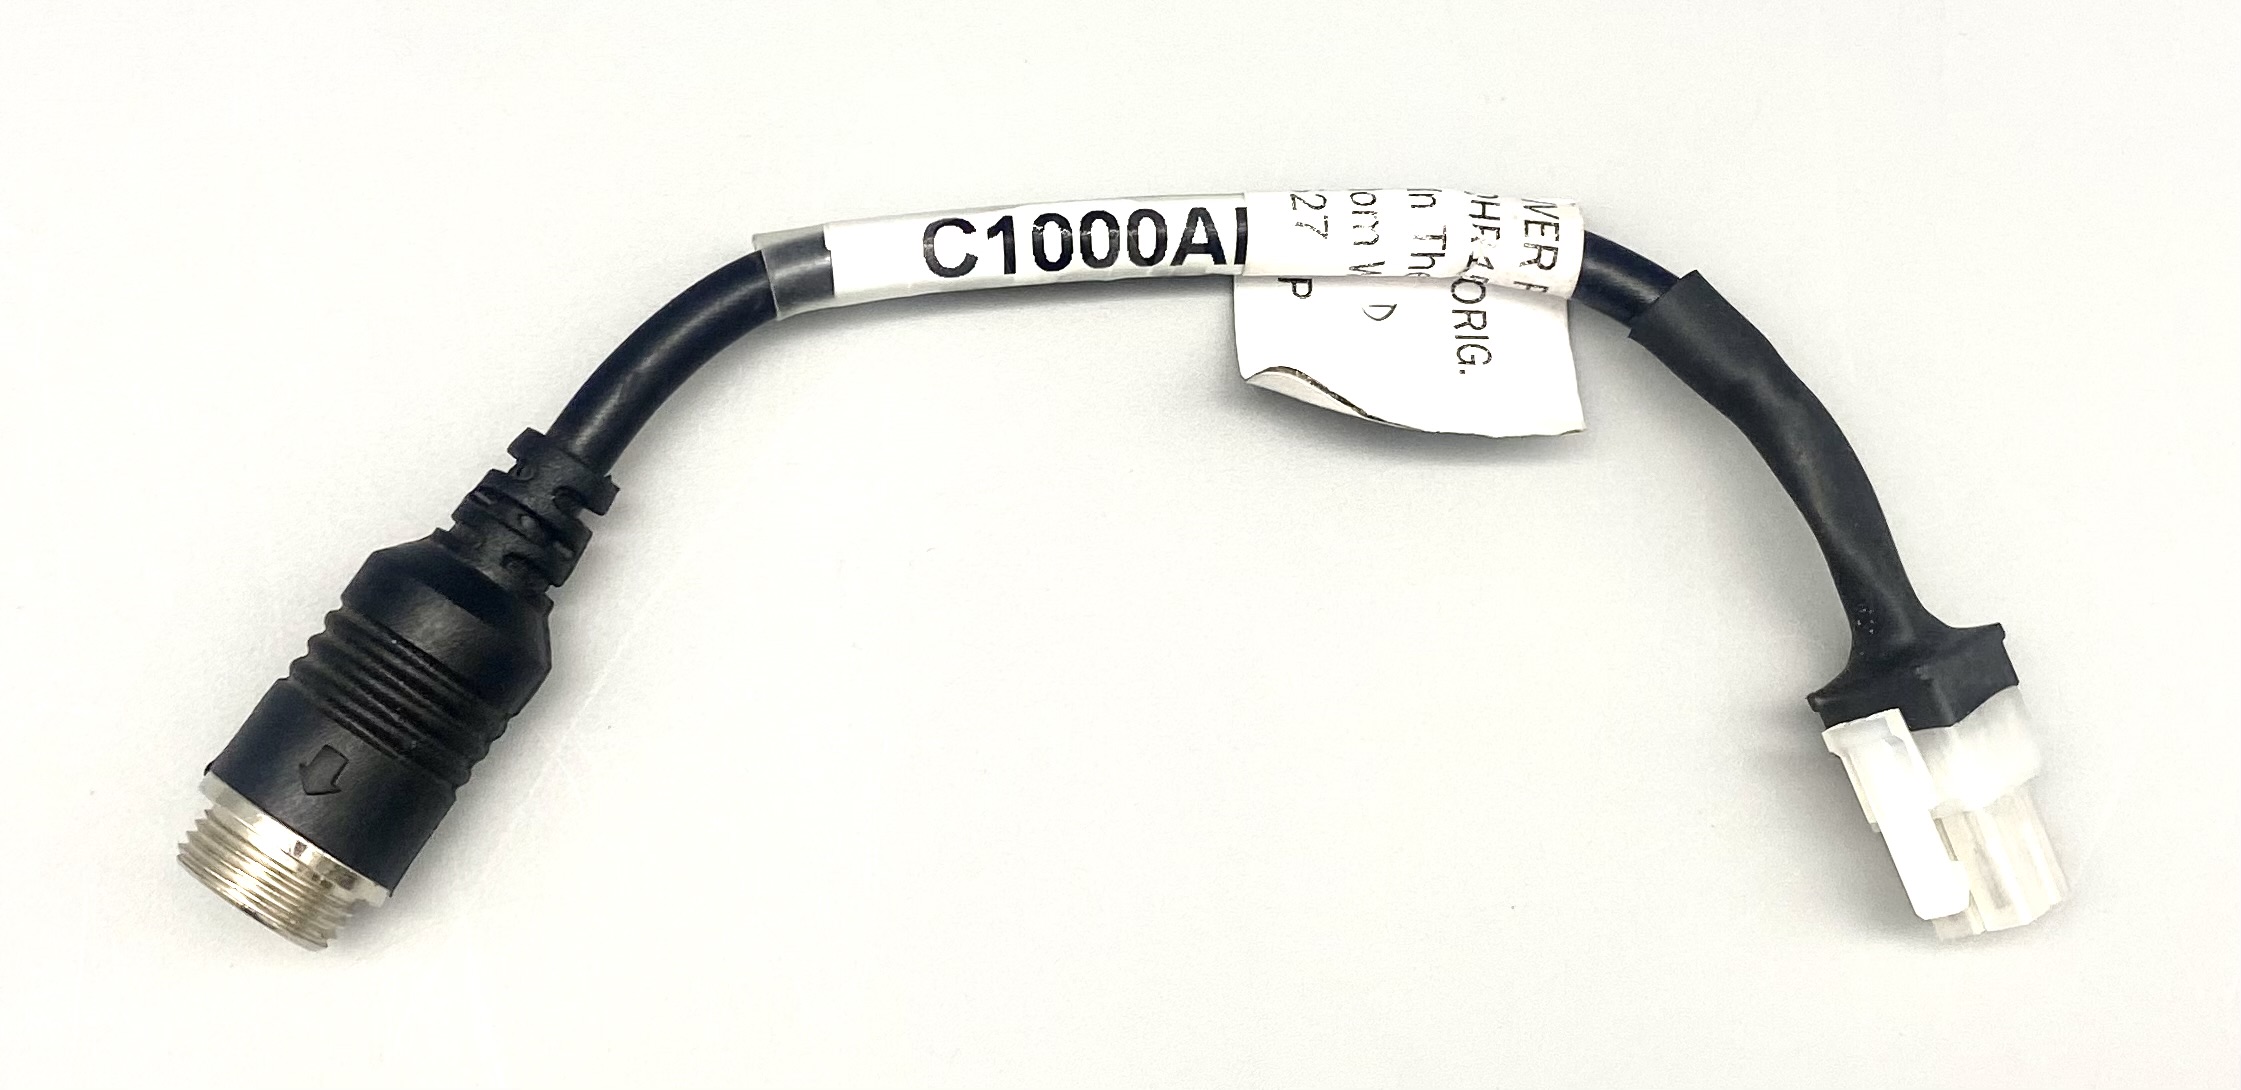 Adapter to allow 4-pin C1000-type cable to plug into 4-pin Molex port on CVS-125+ switchers